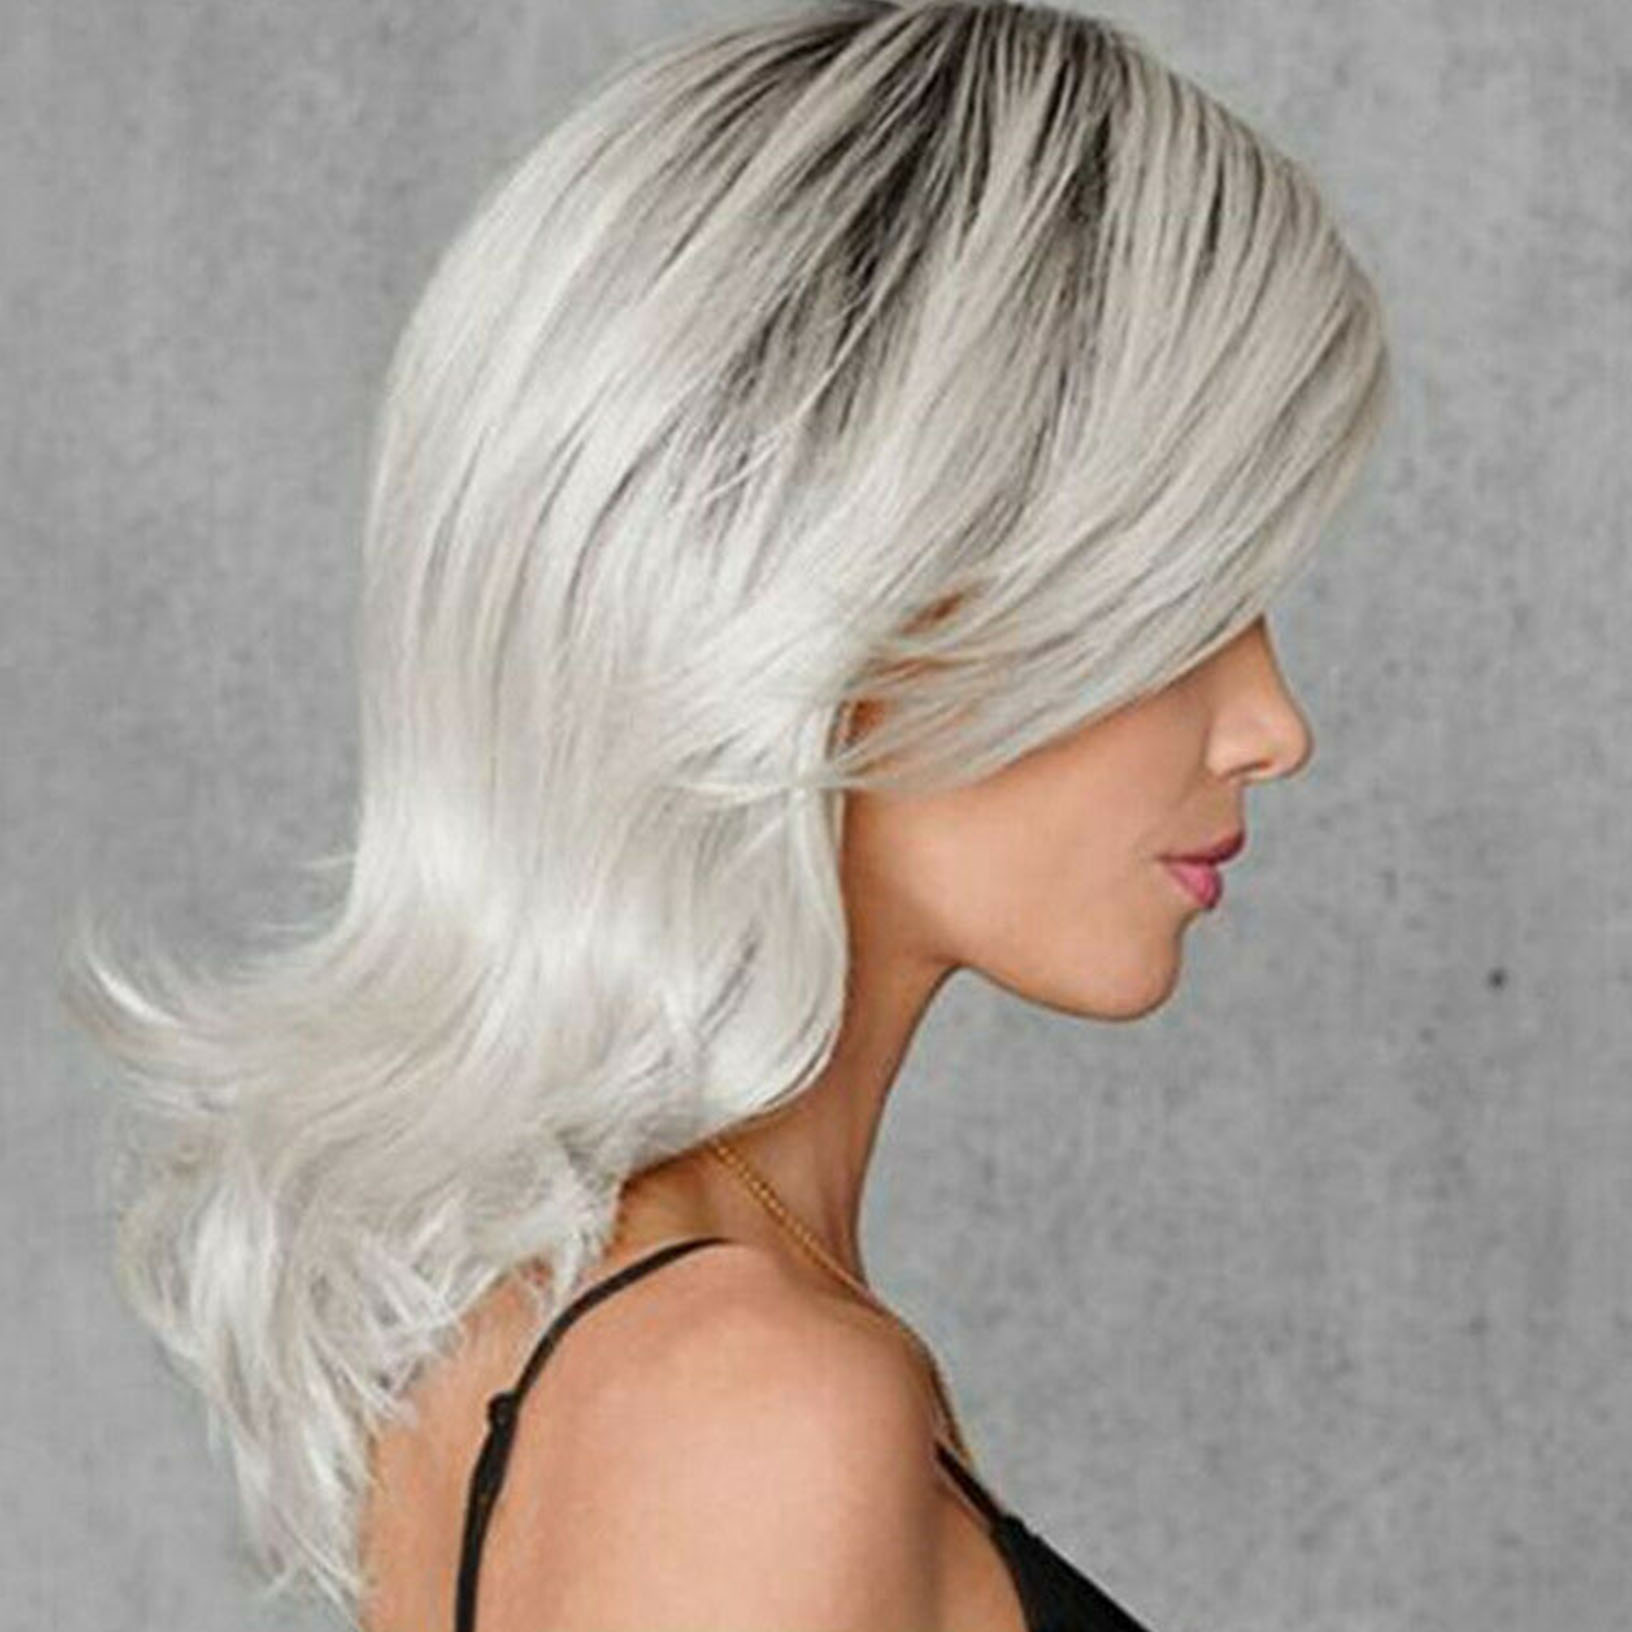 Ash Gray to Silver White Ombre Wavy Curly Blonde Wig